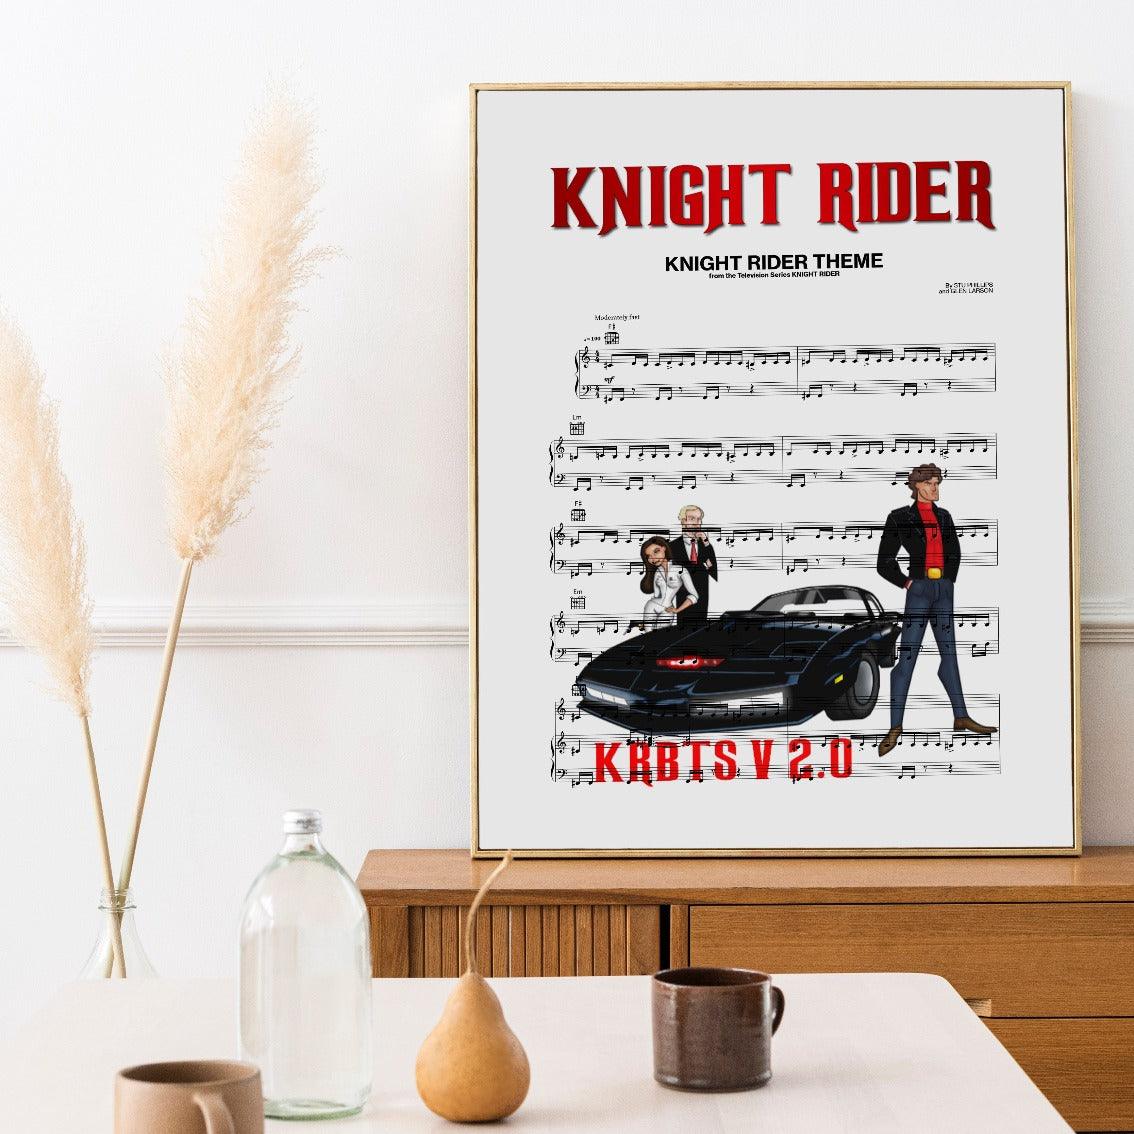 If you're a fan of the show, you need this poster! Here's your chance to own a piece of Knight Rider history. This poster was designed and hand-crafted by the team at 98Types Music, and is a must-have for any fan of the show. The poster is a replica of the original Knight Rider theme music main title sequence, and is printed on high-quality paper for a beautiful finish.